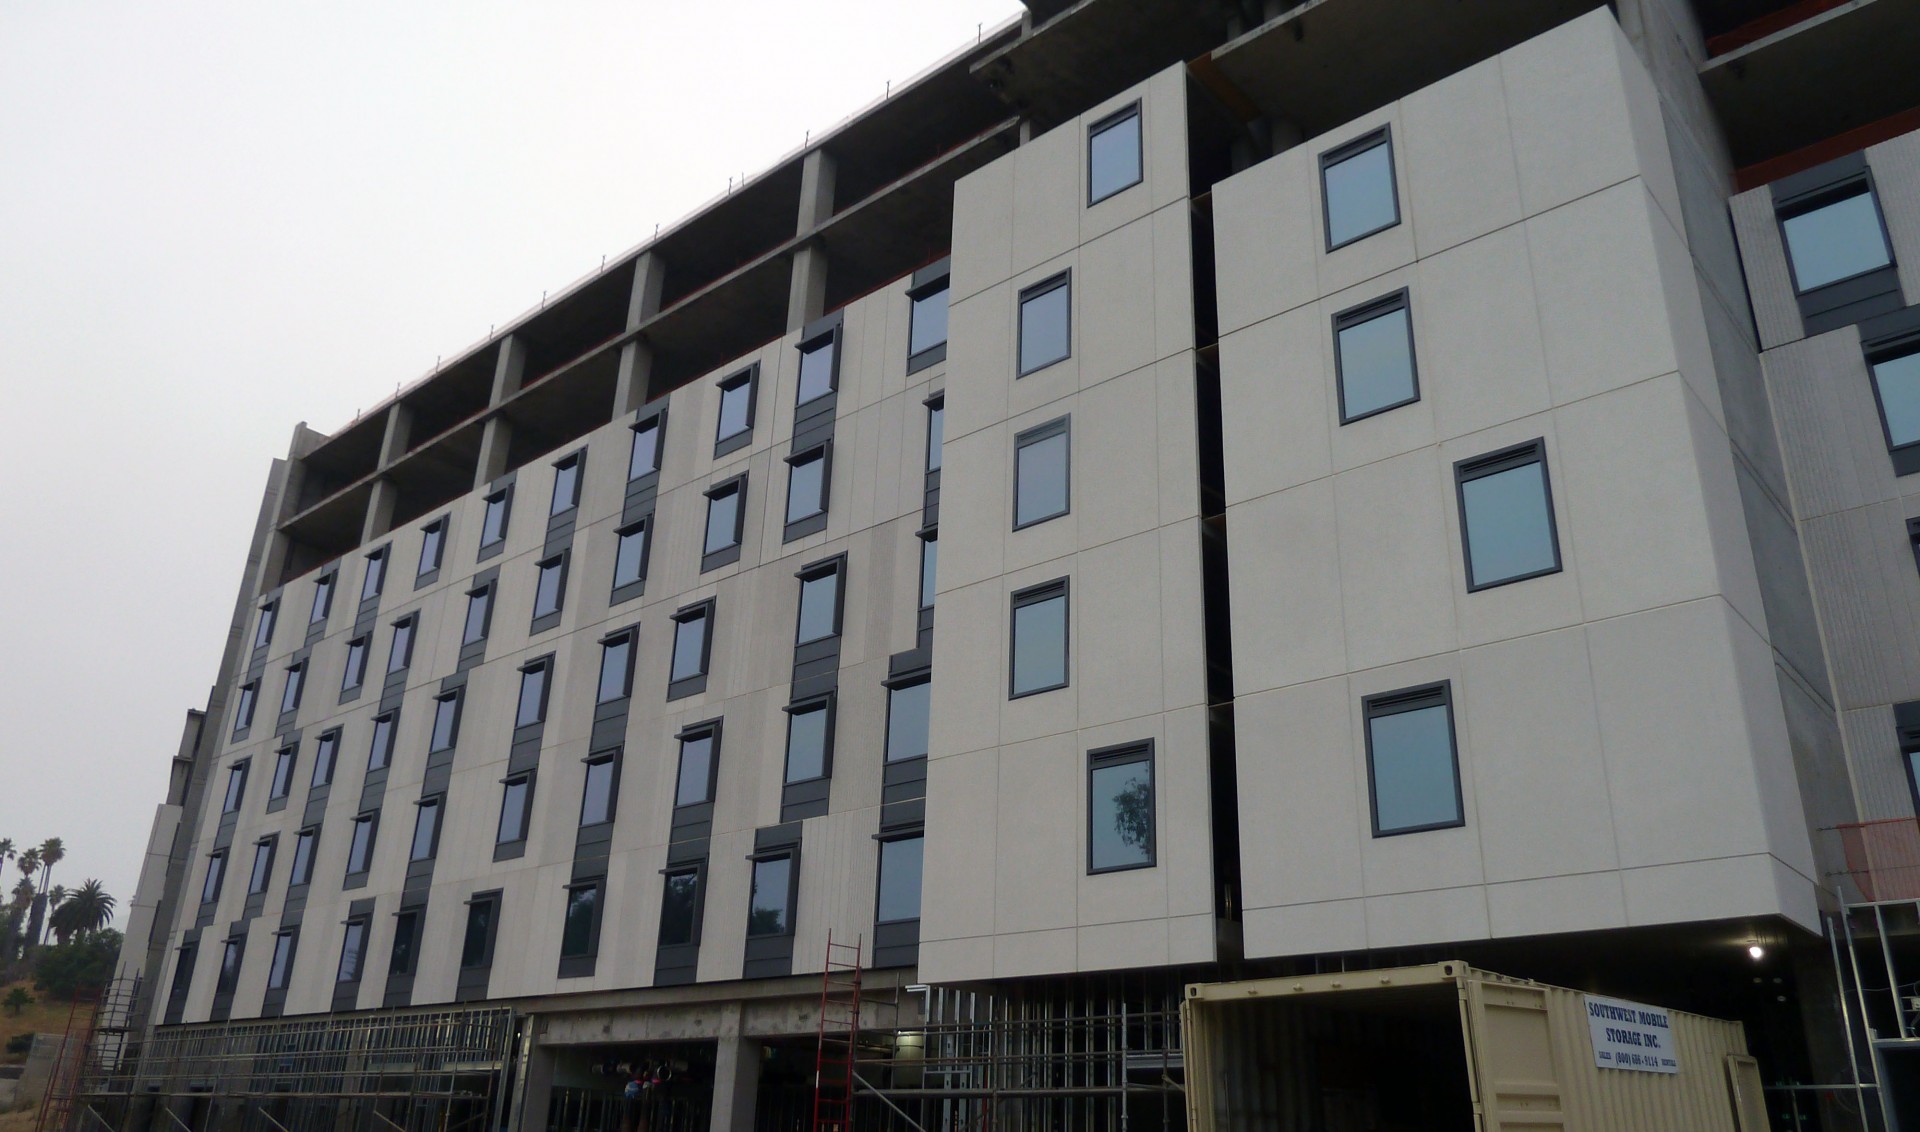 facade and windows of housing building under construction